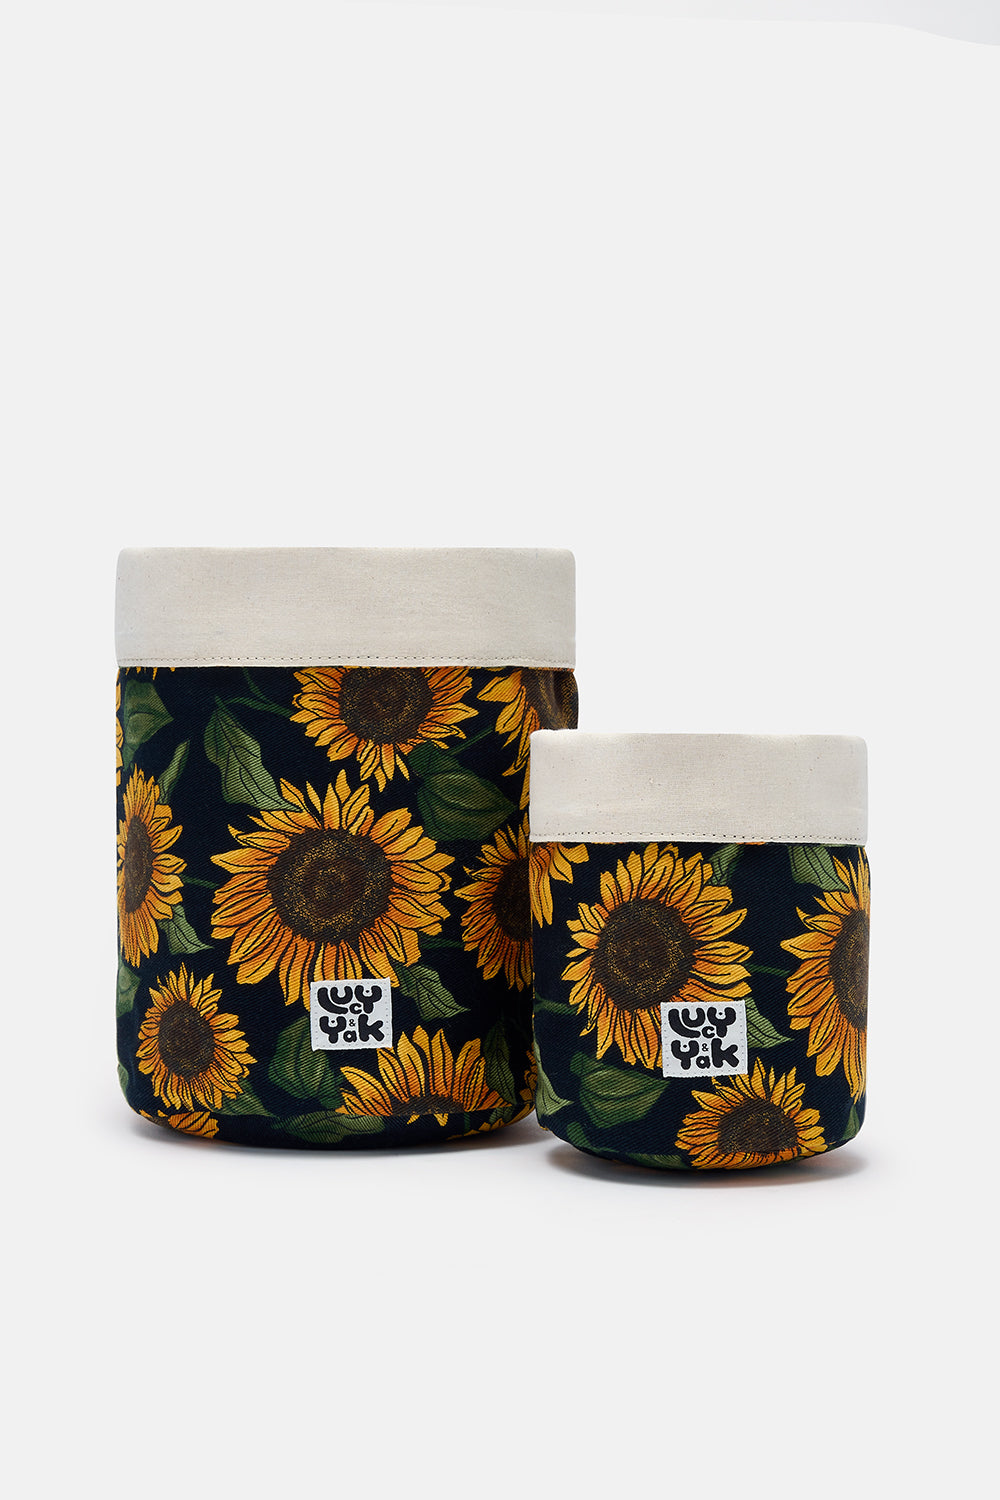 Plant Pot Covers: DEADSTOCK FABRIC - Sunflower Print